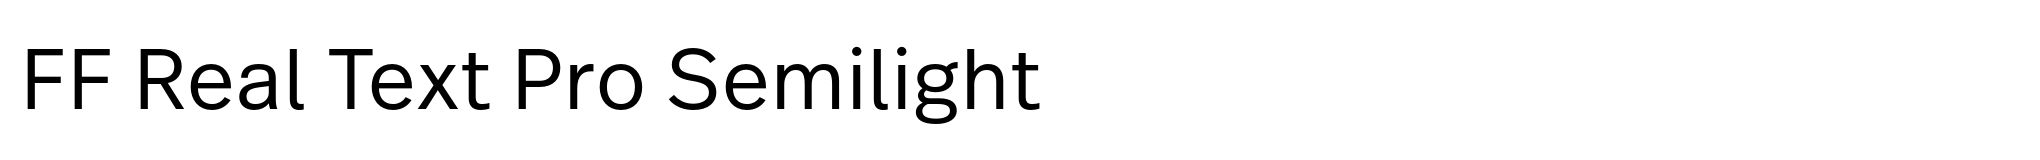 FF Real Text Pro Semilight image